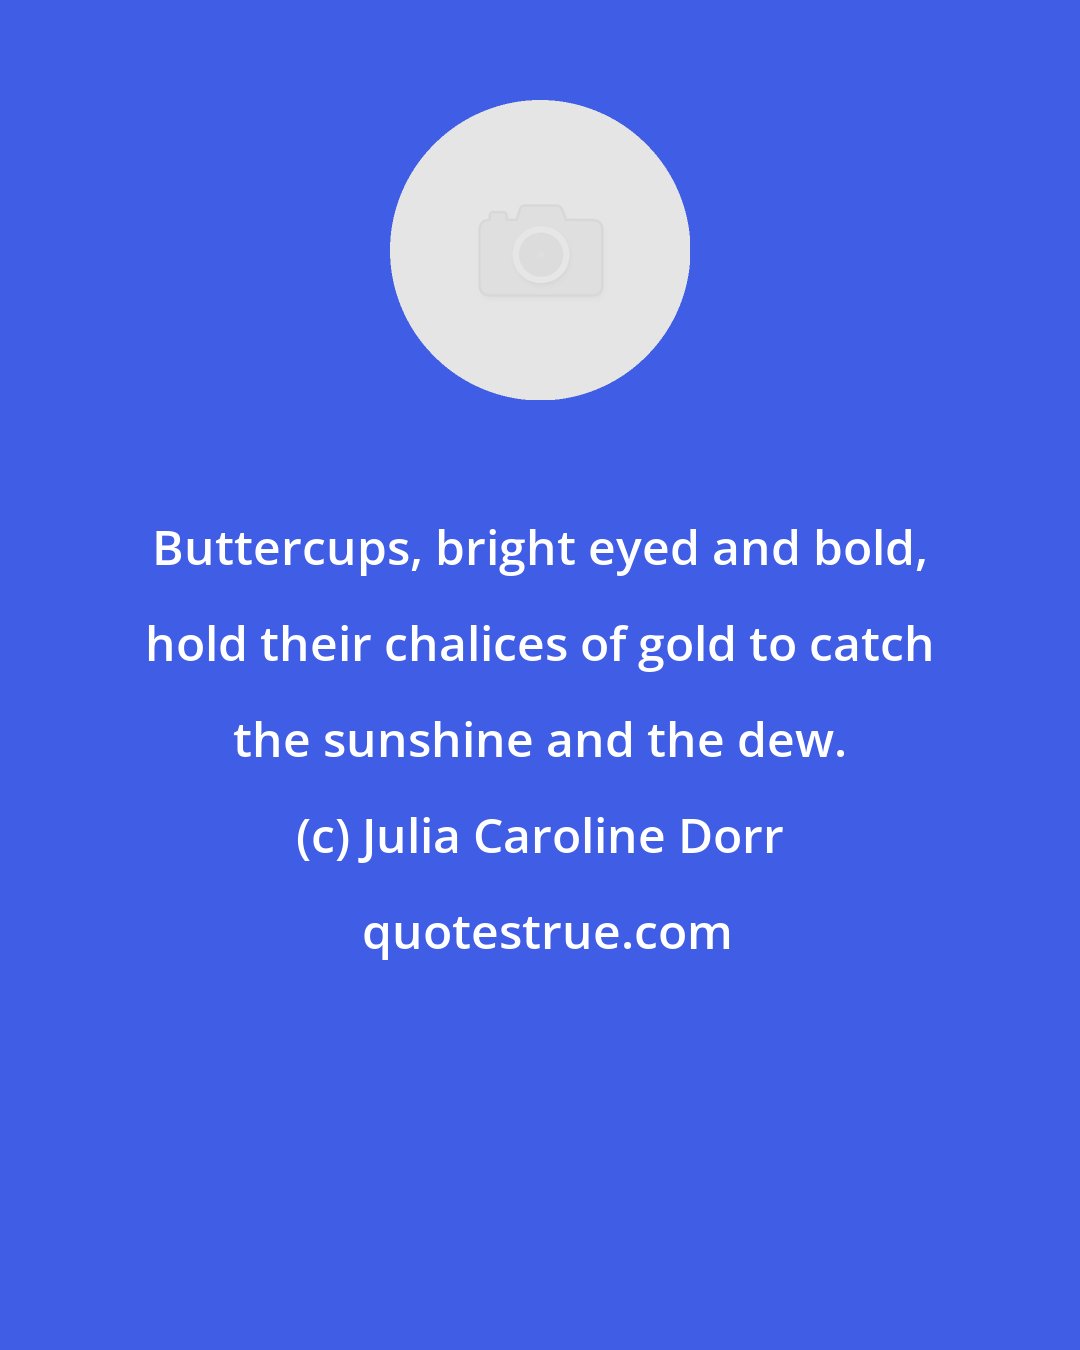 Julia Caroline Dorr: Buttercups, bright eyed and bold, hold their chalices of gold to catch the sunshine and the dew.